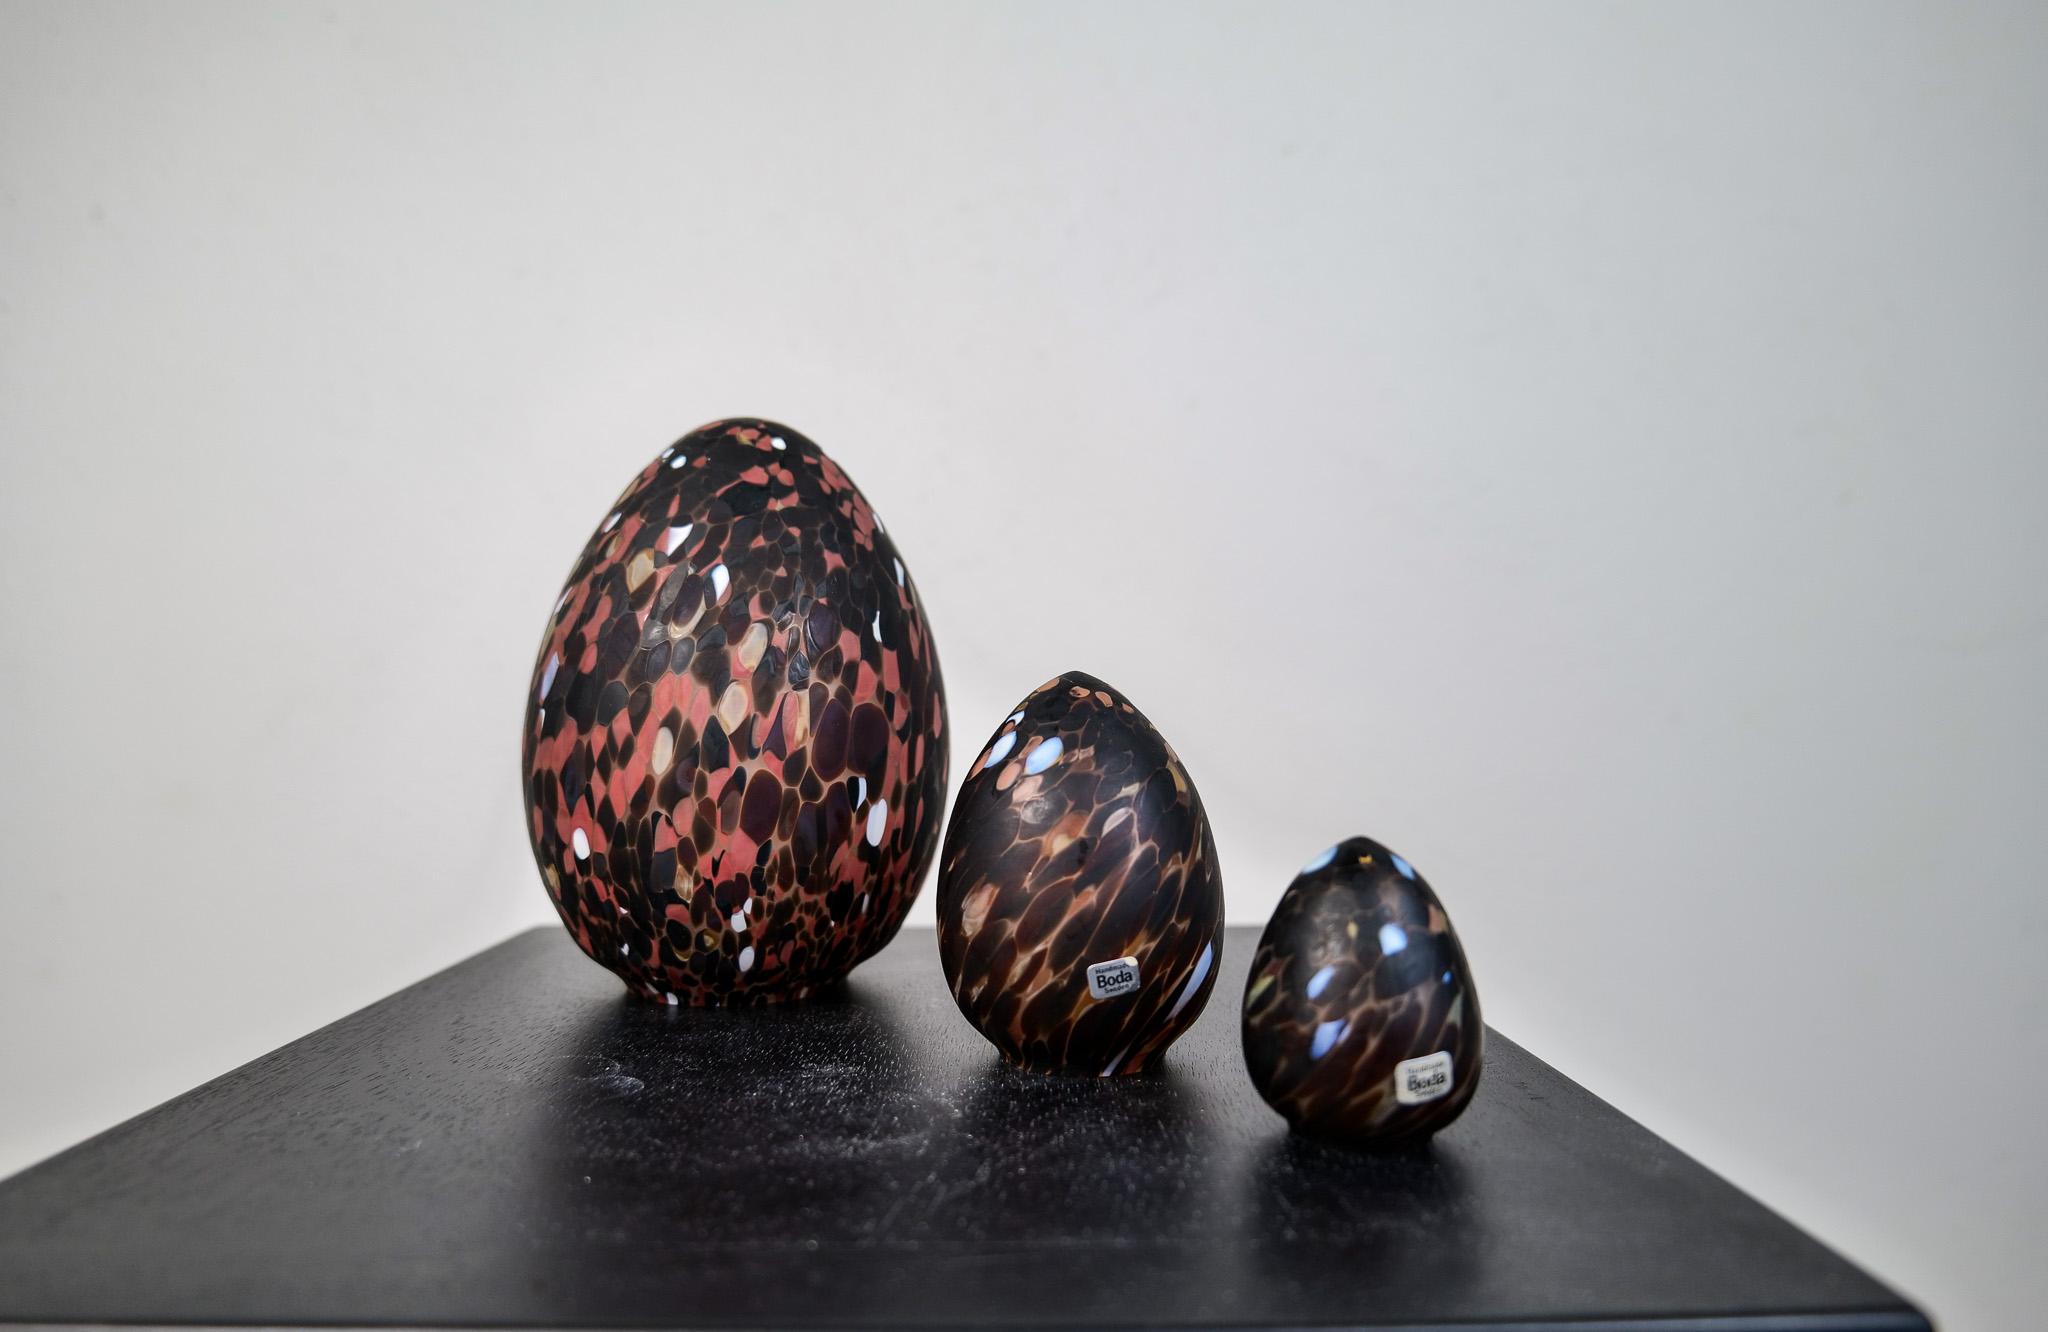 This set of 3 eggs with a swelling shape and mottled brown surface was designed by Monica Backström. They are al unique and was mouth-blown and hand-crafted.
Designed in the 1970s as part of the 